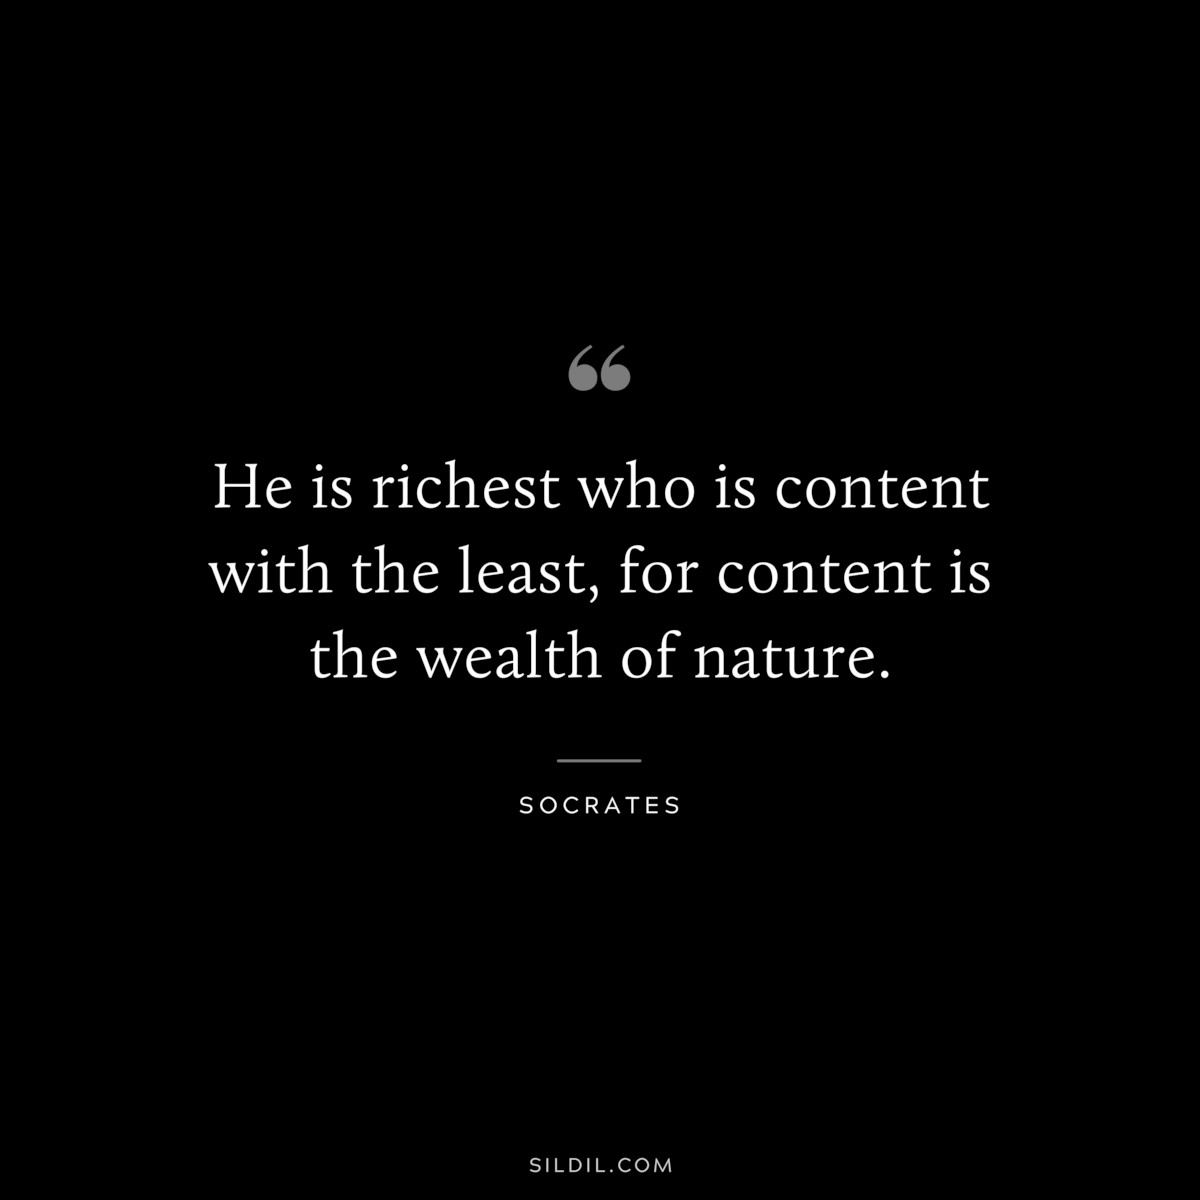 He is richest who is content with the least, for content is the wealth of nature. ― Socrates